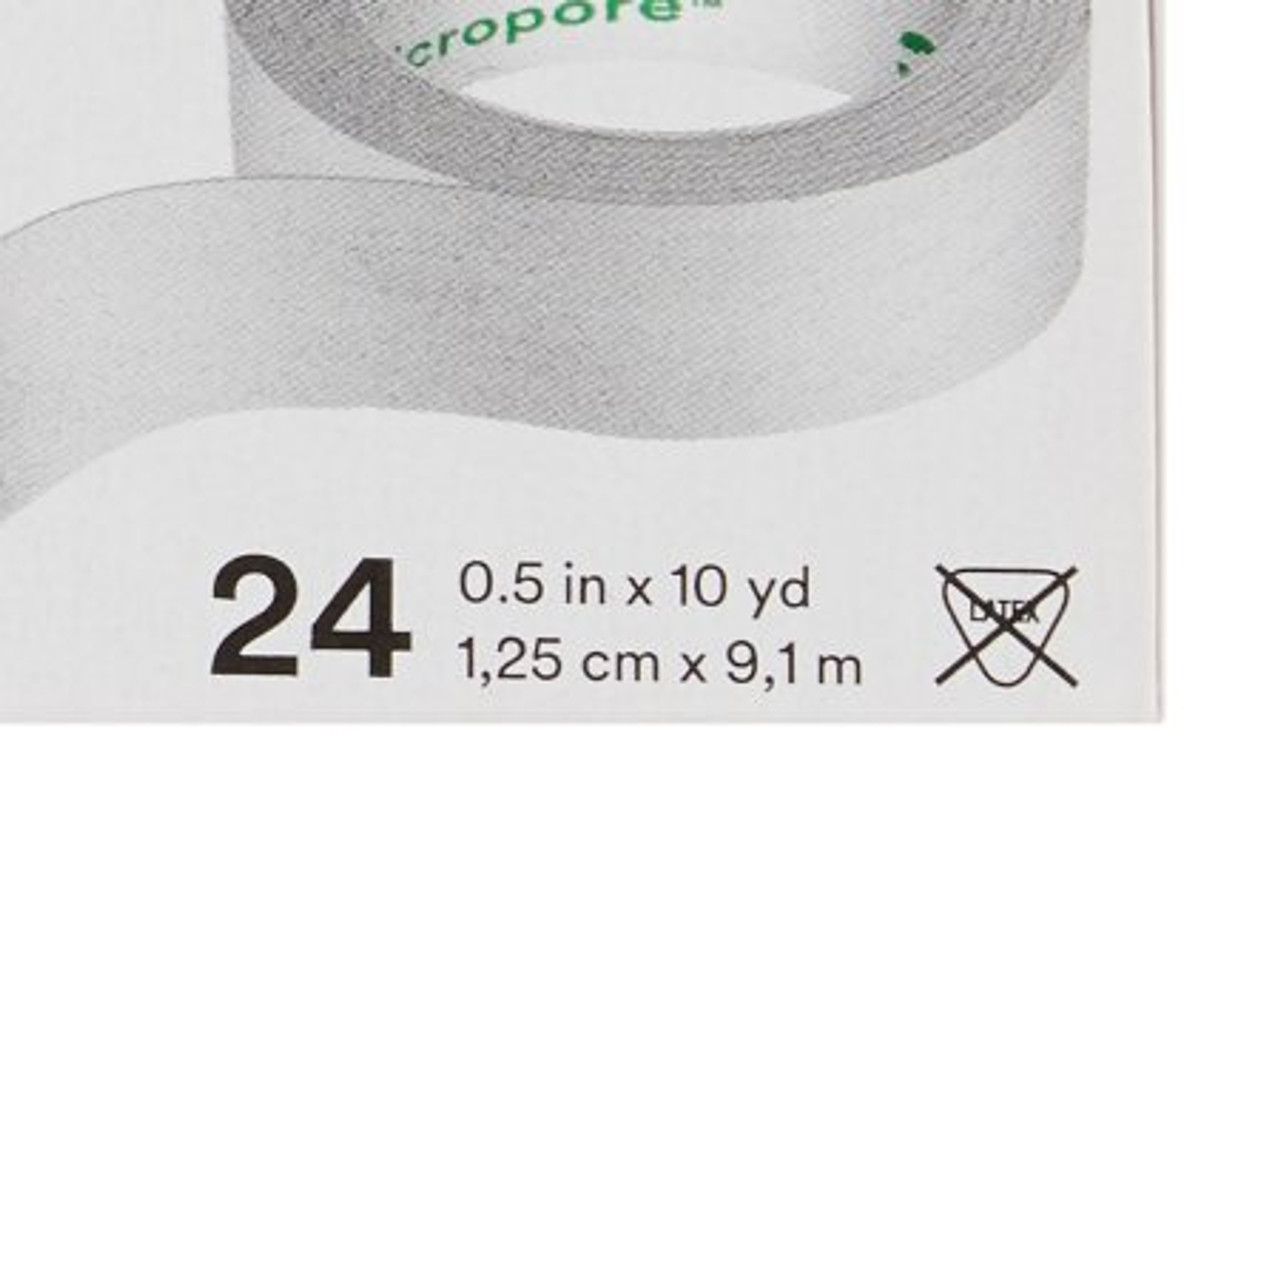 3M 1530-0 Micropore PAPER Medical Tape 1/2 x 10 yds Box of 24